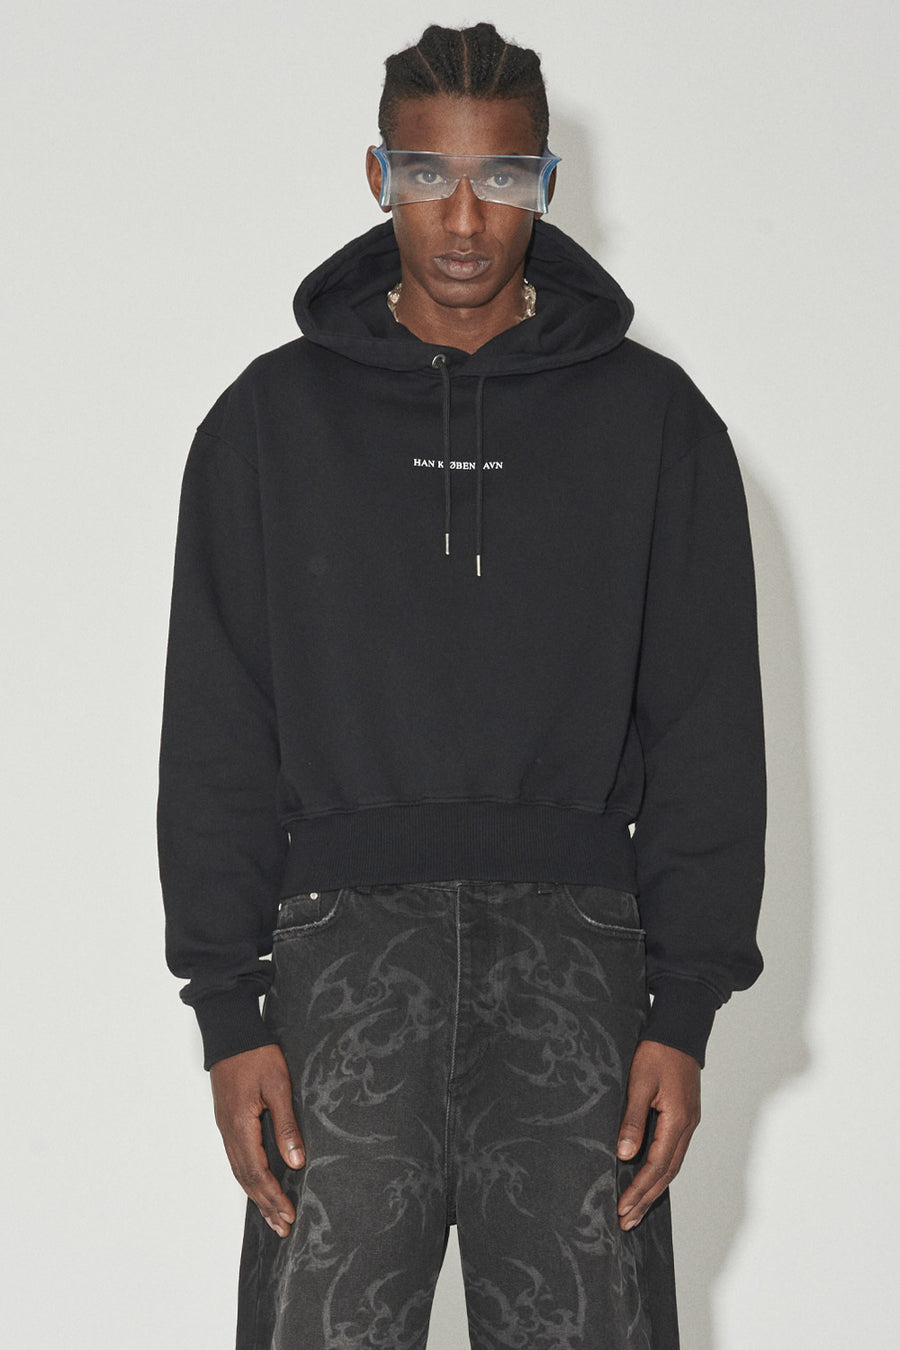 Buy the Han Kjobenhavn Supper Cropped Relaxed Hoodie in Black at Intro. Spend £50 for free UK delivery. Official stockists. We ship worldwide.